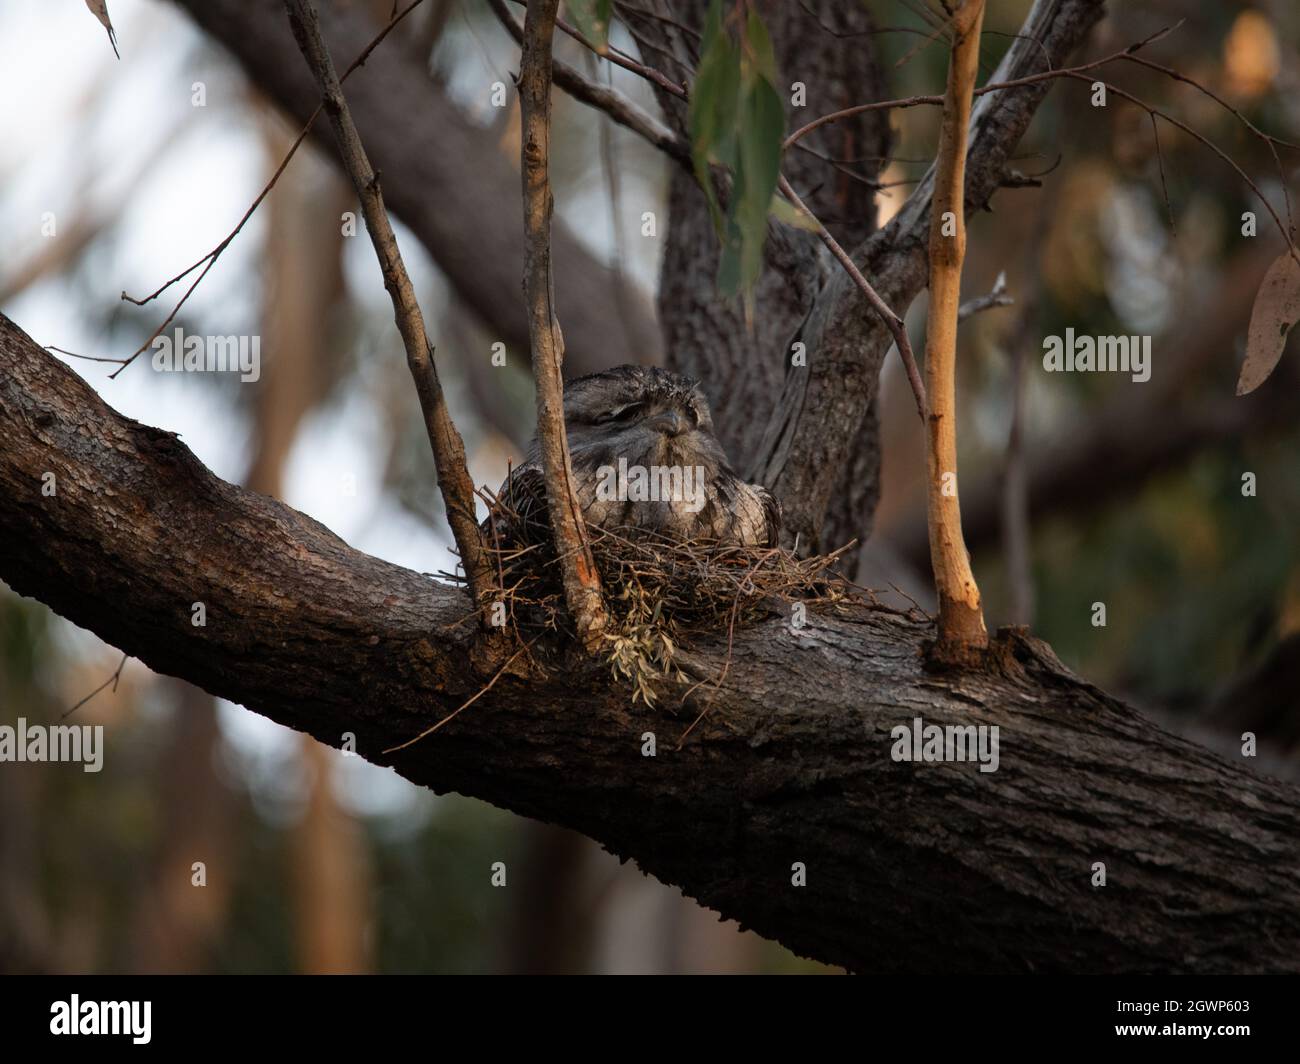 Tawny Frogmouth nesting on top of its chicks. Stock Photo